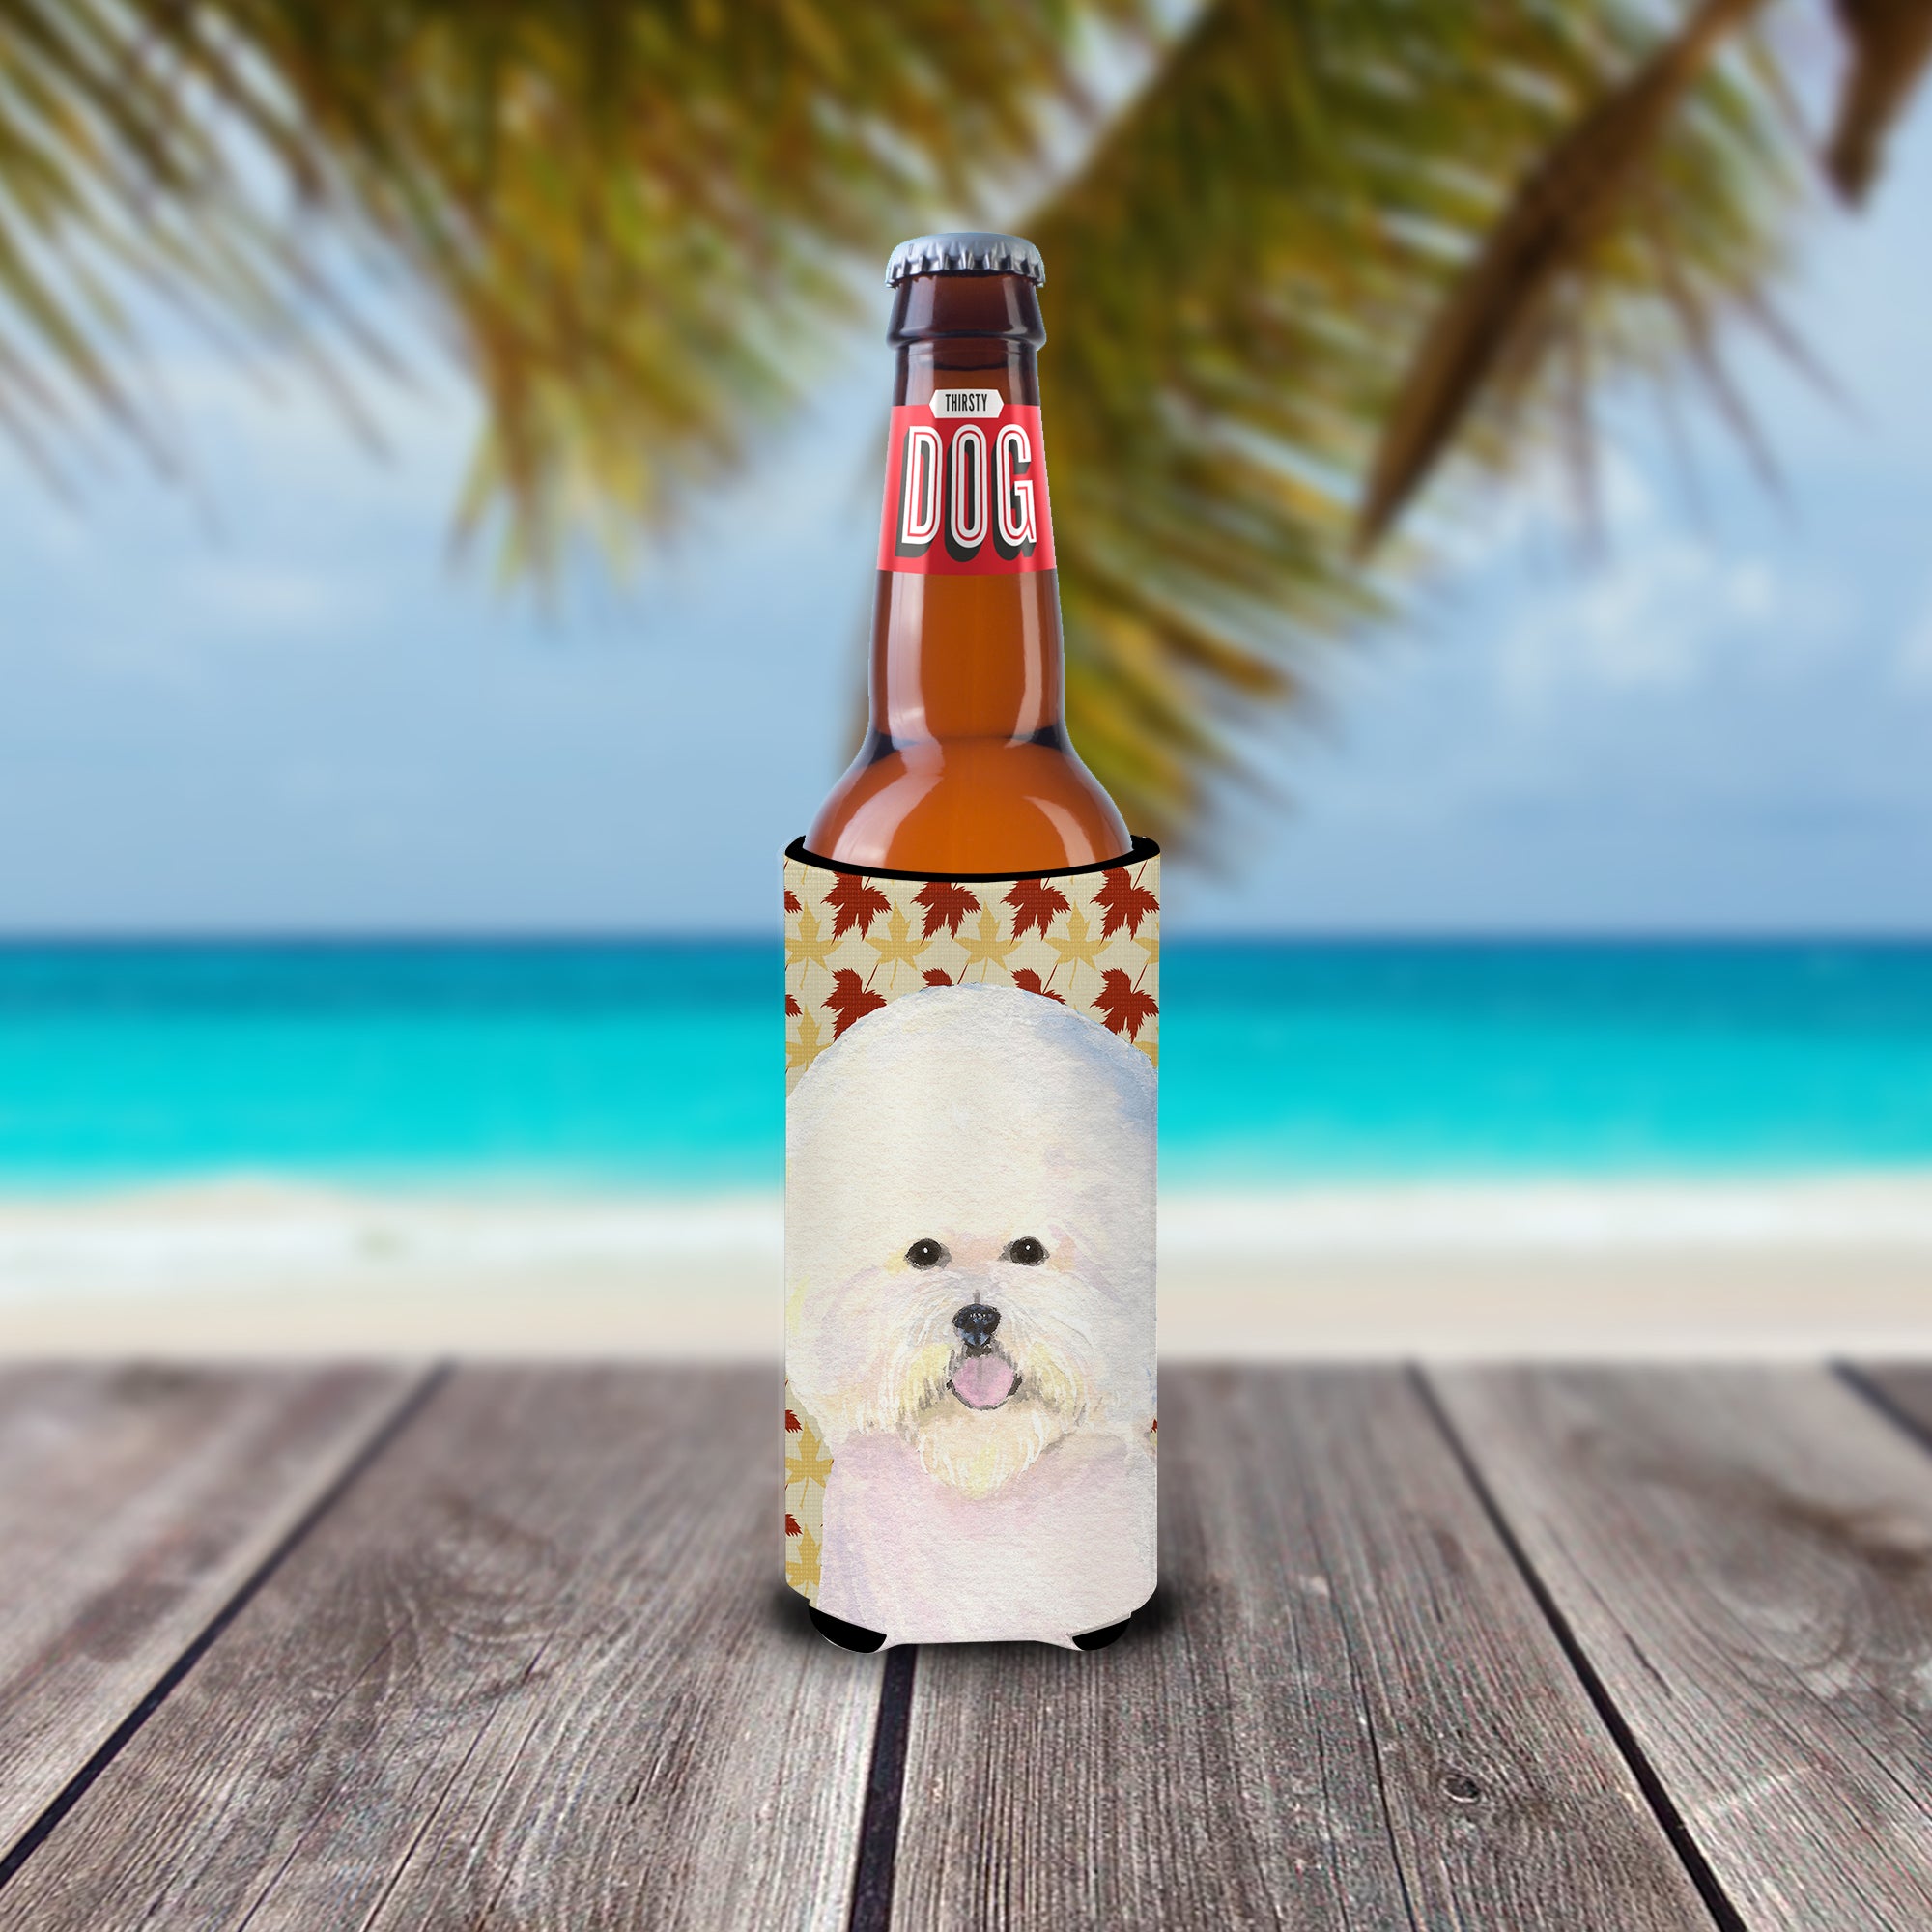 Bichon Frise Fall Leaves Portrait Ultra Beverage Insulators for slim cans SS4330MUK.